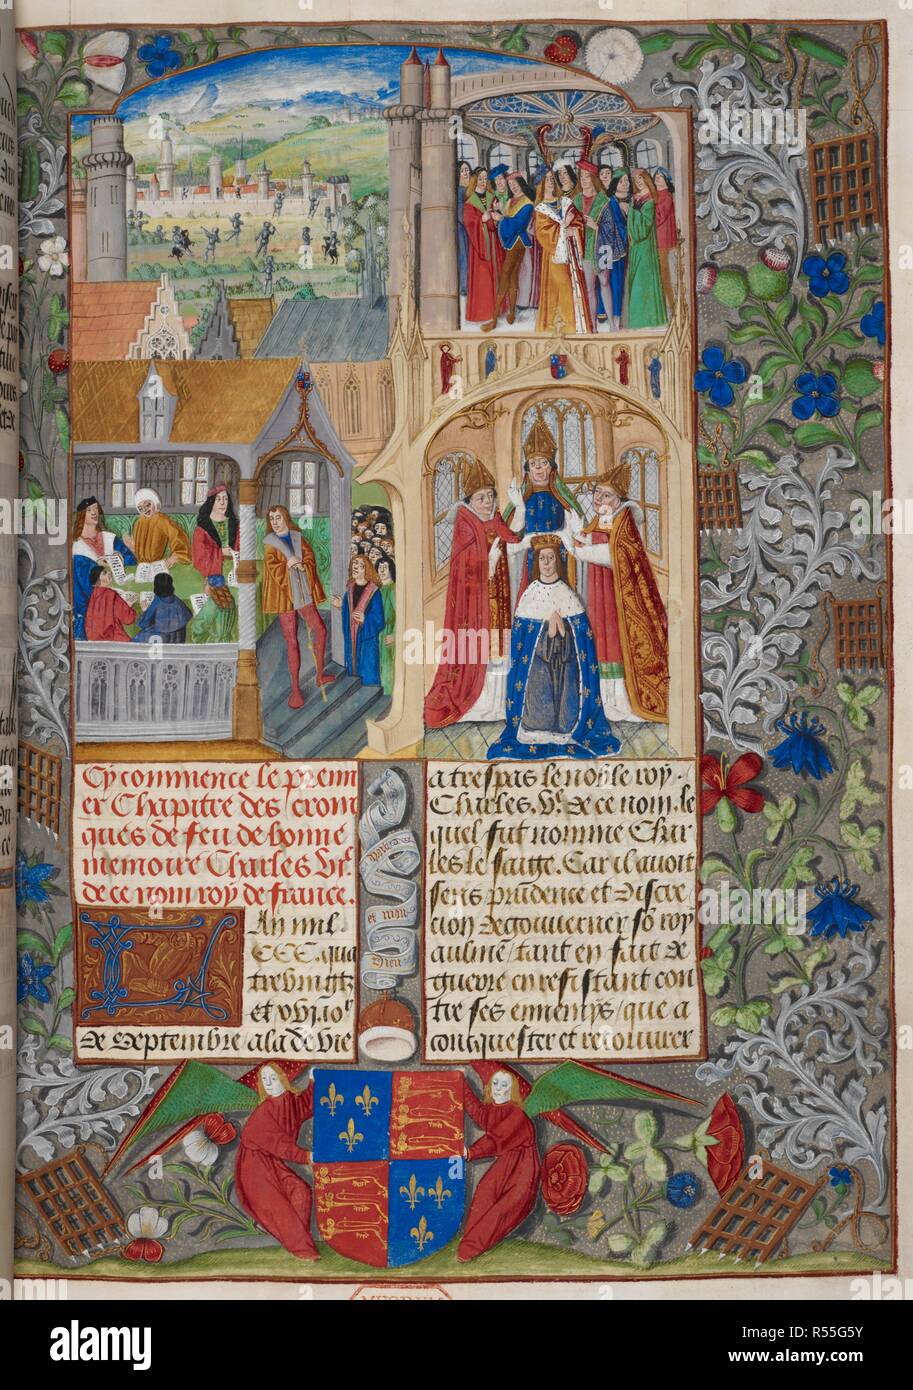 Coronation of Charles VII. Miniature composed of four scenes: 1. France ravaged by the English; 2. A council of barons; 3. Lawyers reading opinions to Louis of Anjou and Sicily; 4. The coronation of Charles VII, with a full border containing the royal arms of England, a scroll with the motto 'Dieu et mon droit' and six portcullis badges of the Beauforts used by Henry VII; and an illuminated initial 'L'(an). Chroniques de France ou de Saint Denis (from 1380 to 1422). Netherlands, S., or England, 1487. Source: Royal 20 E. V, f.8. Author: Hugues de Lembourg (Scribe). Stock Photo